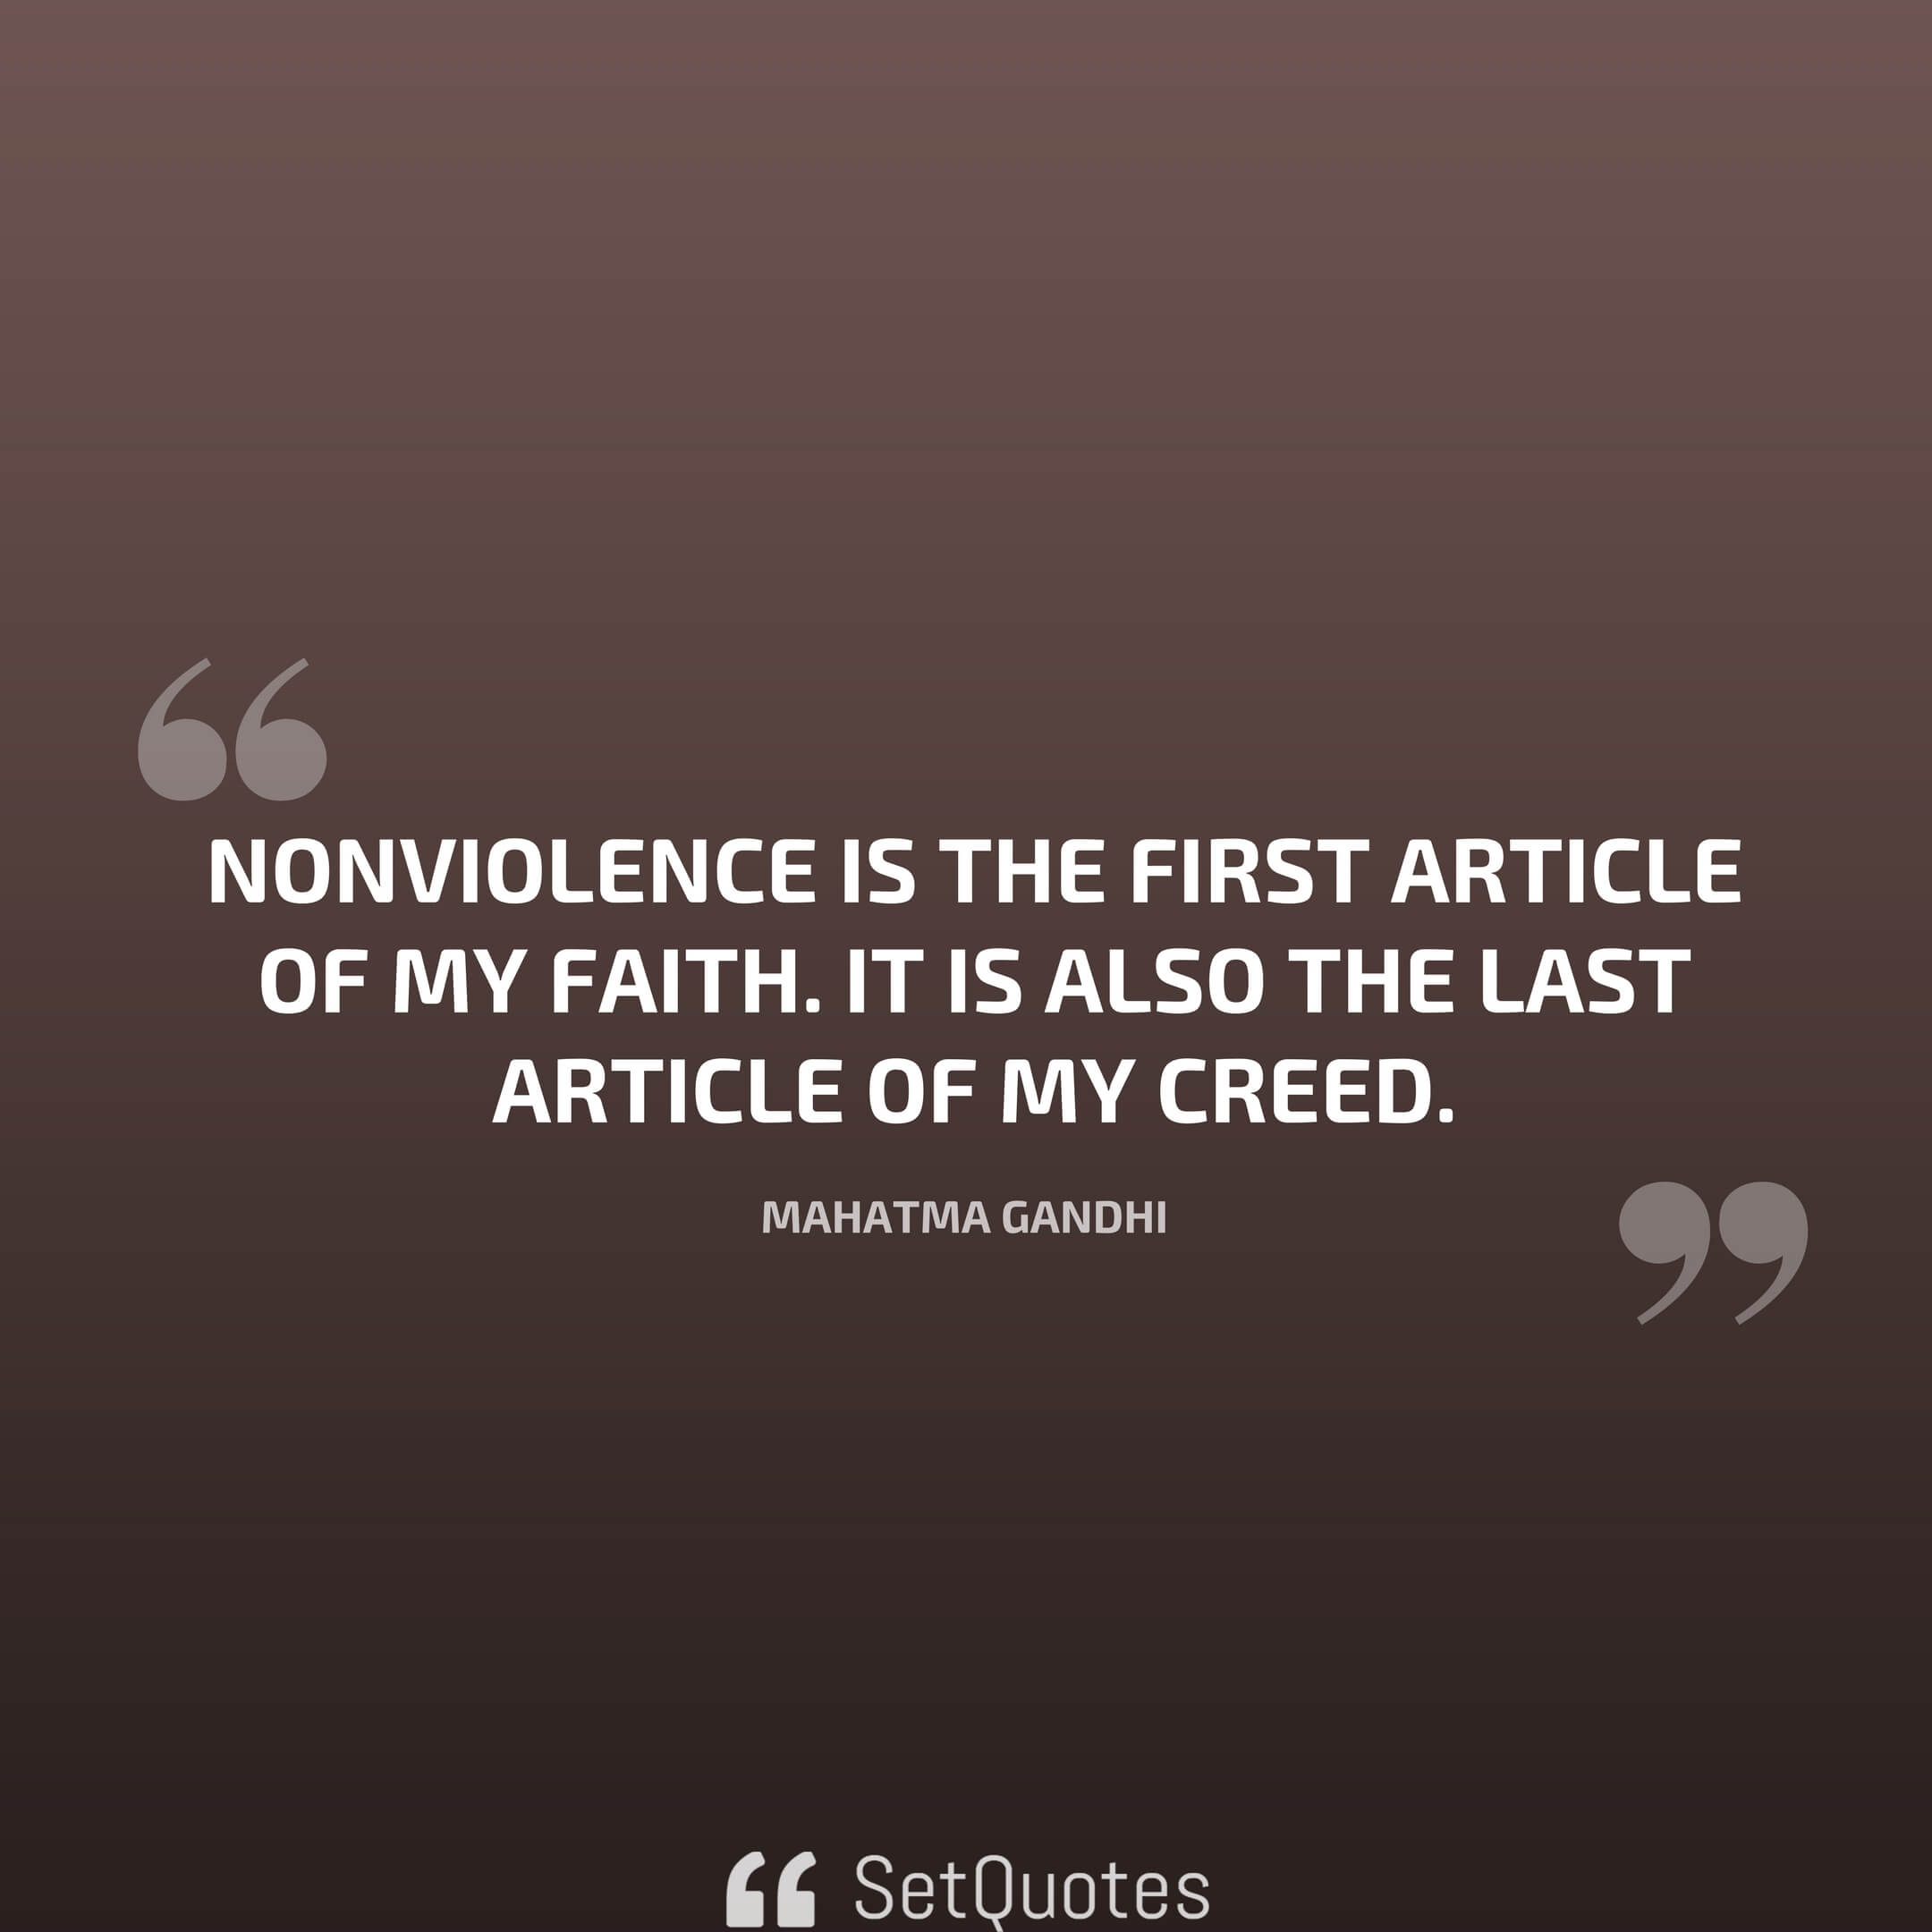 Nonviolence is the first article of my faith. It is also the last article of my creed. - Mahatma Gandhi